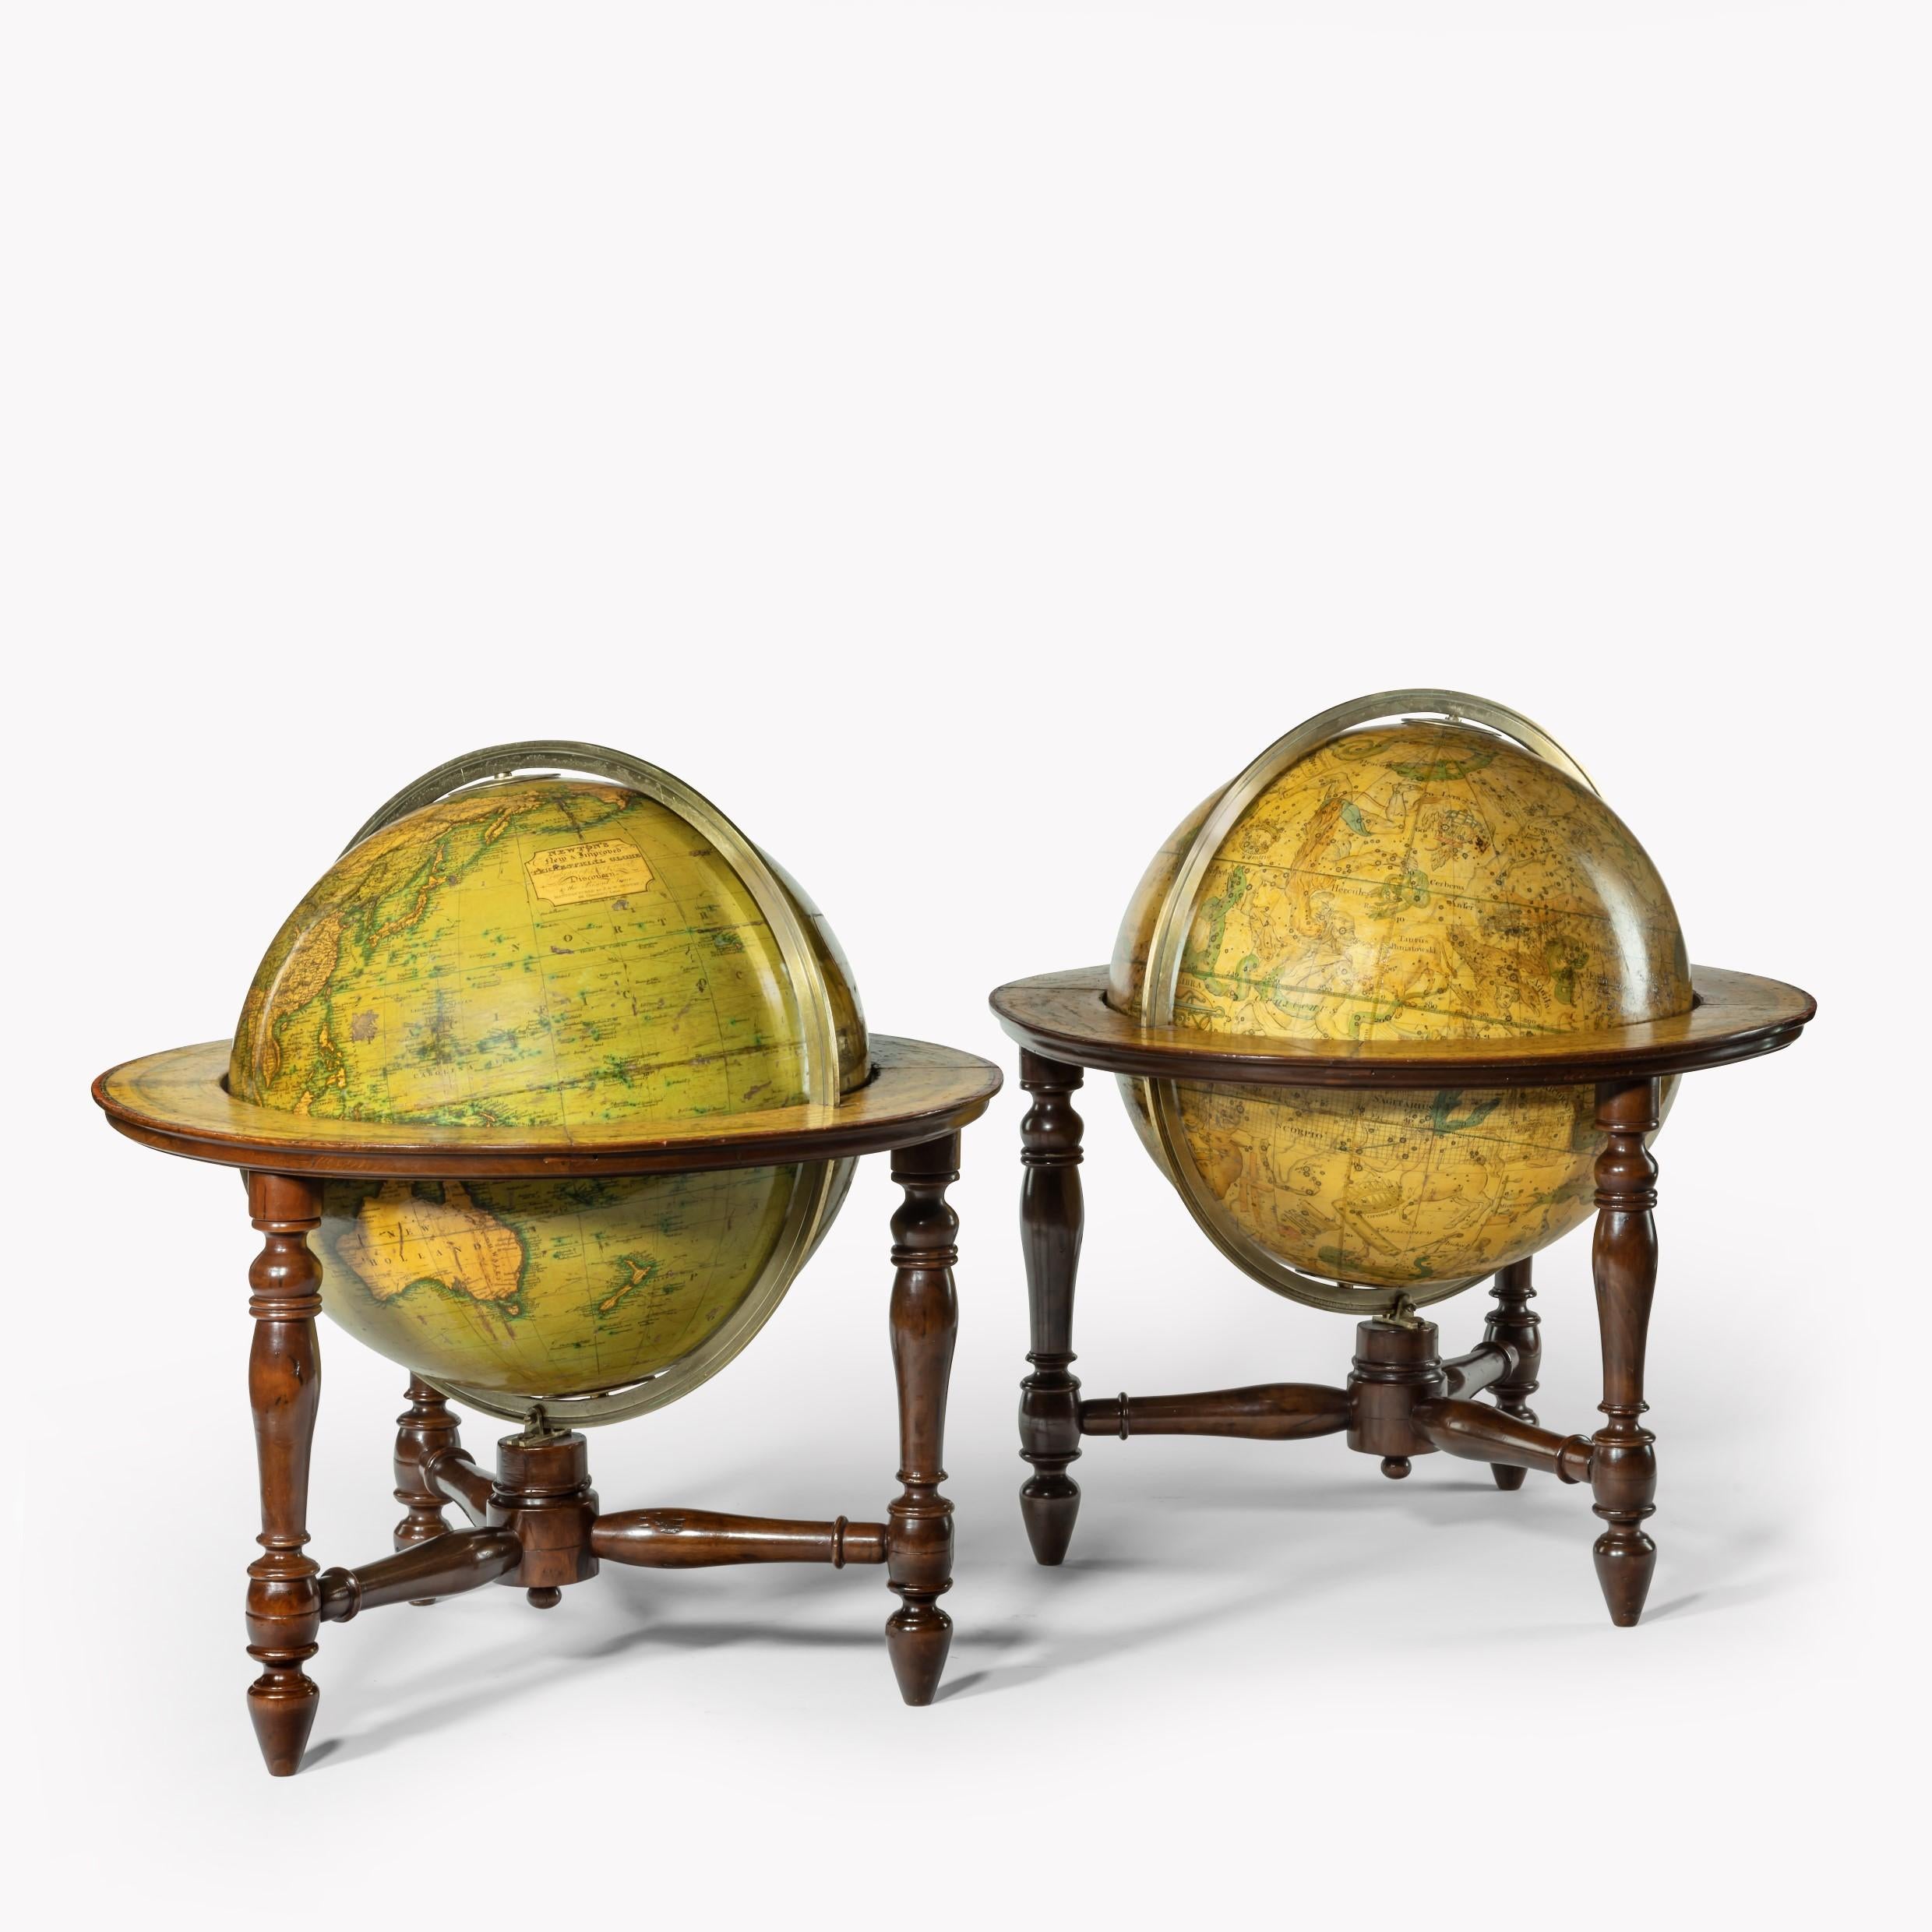 A pair of 12 inch table globes by J & W Newton, dated 1820, each with 12 hand coloured gores, graduated meridian rings, set within ebonised stands with three turned legs. The terrestrial globe stating ‘Newton’s New & Improved Terrestrial Globe